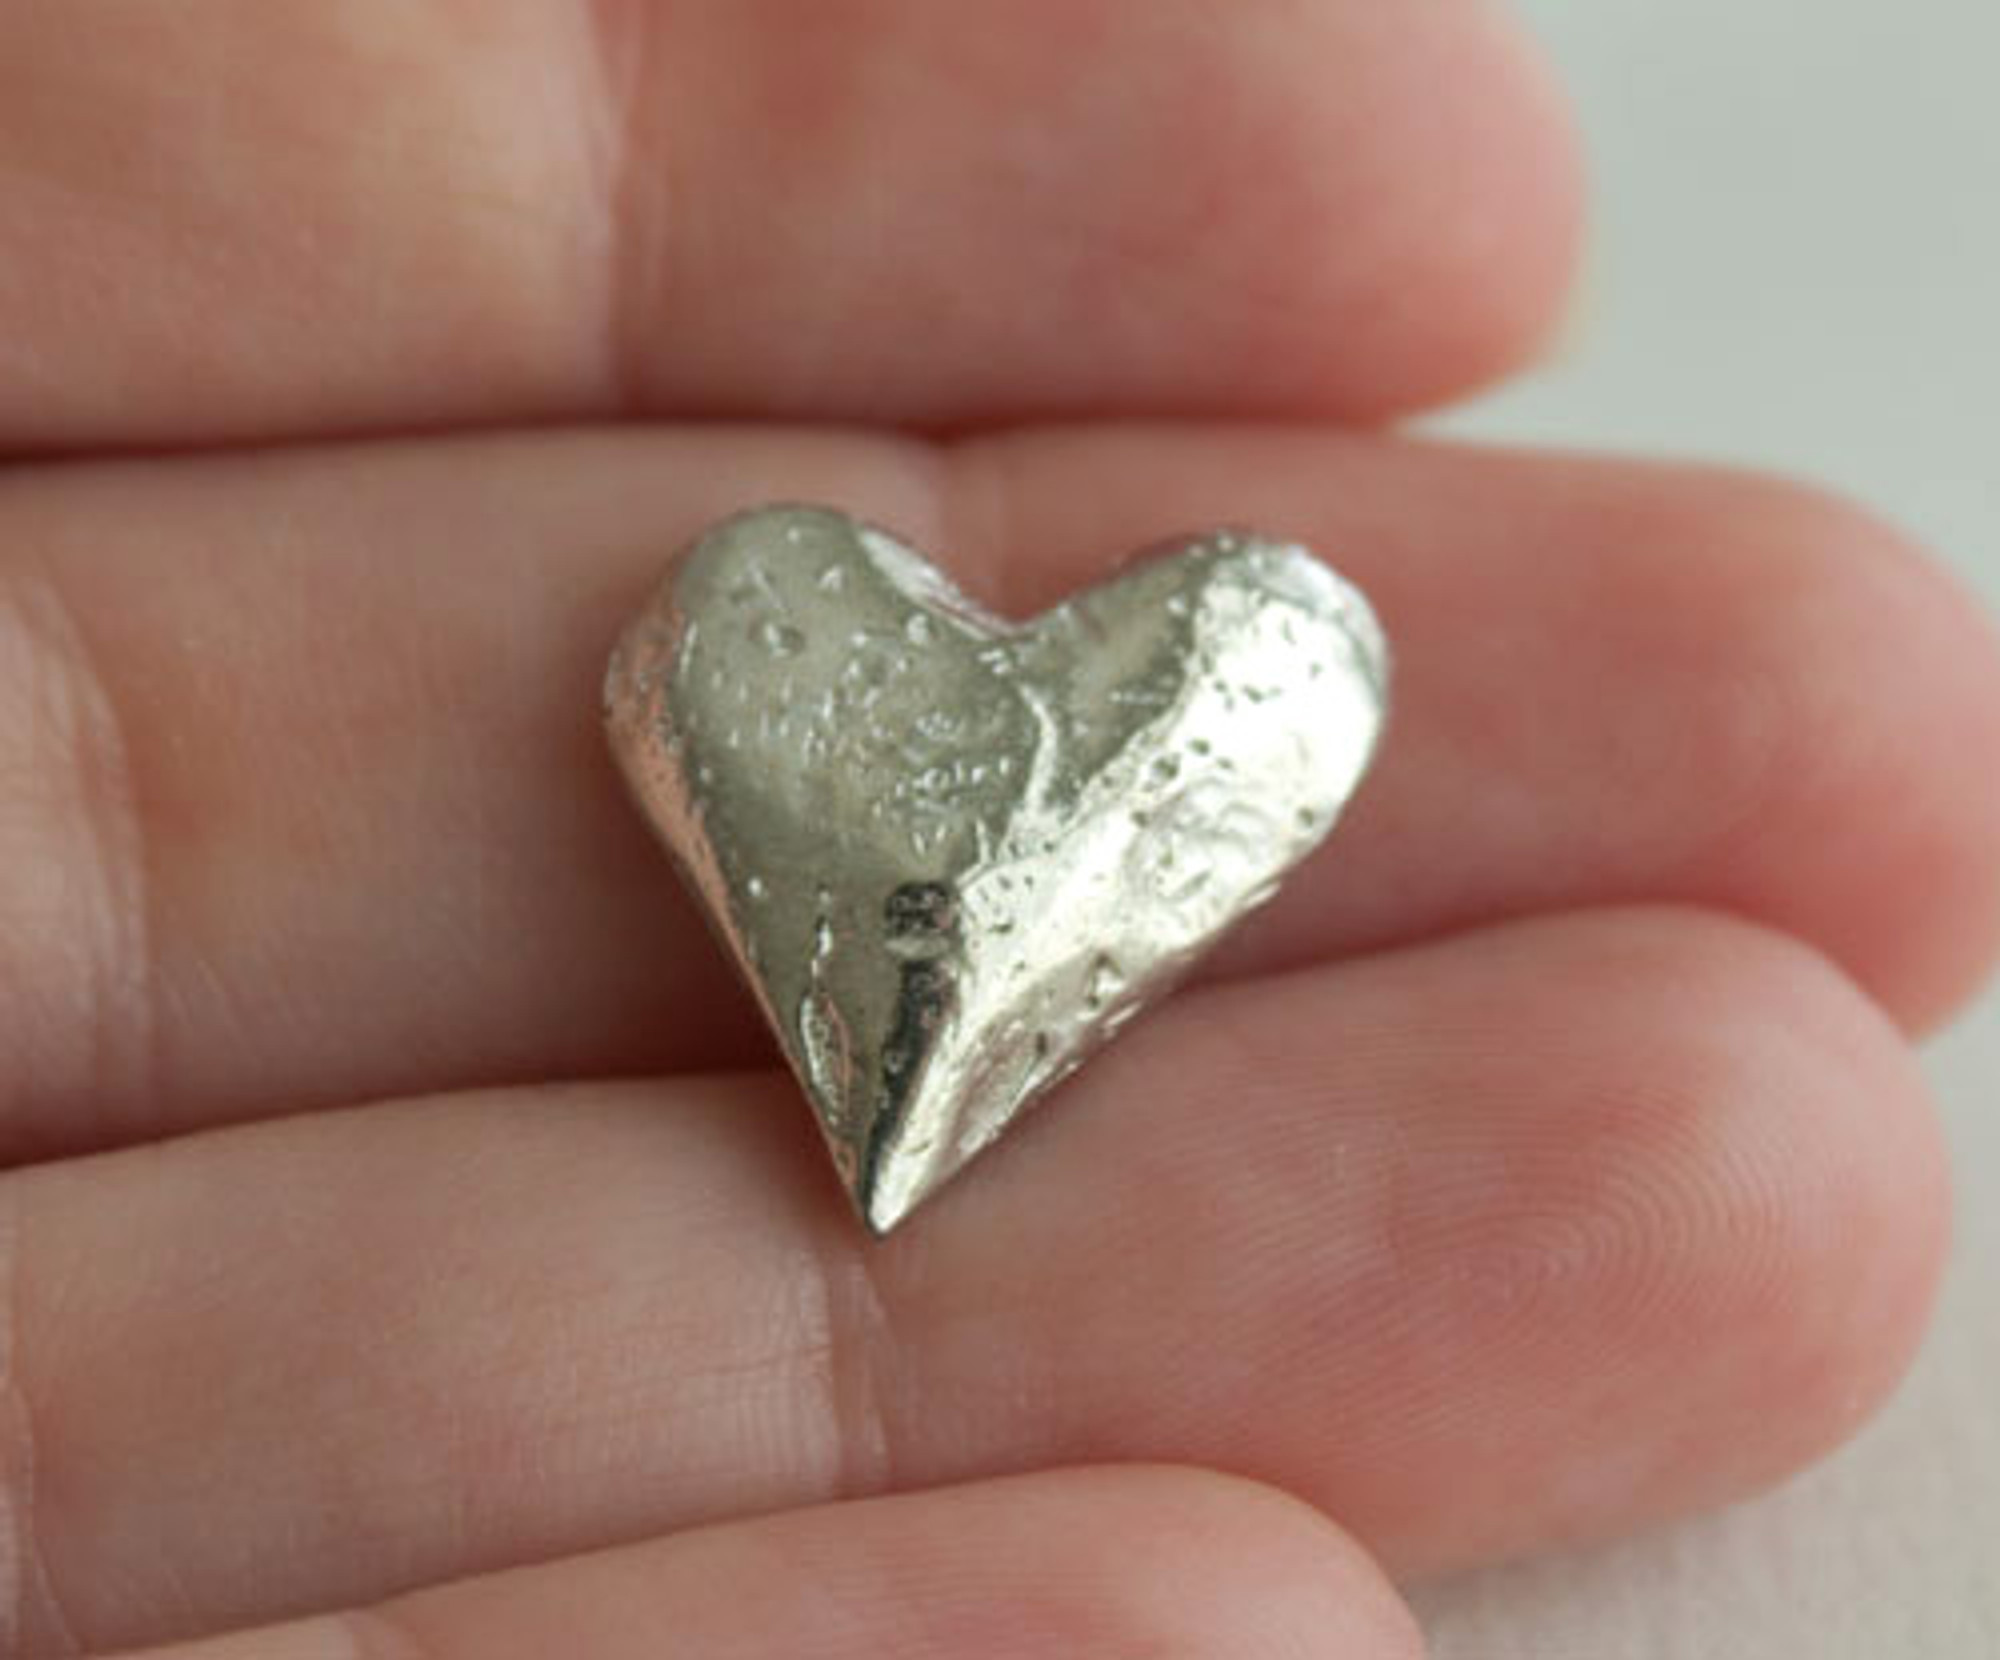 HEART TO RUN Round Pewter Charm - 1/2 inch Round Pewter Char